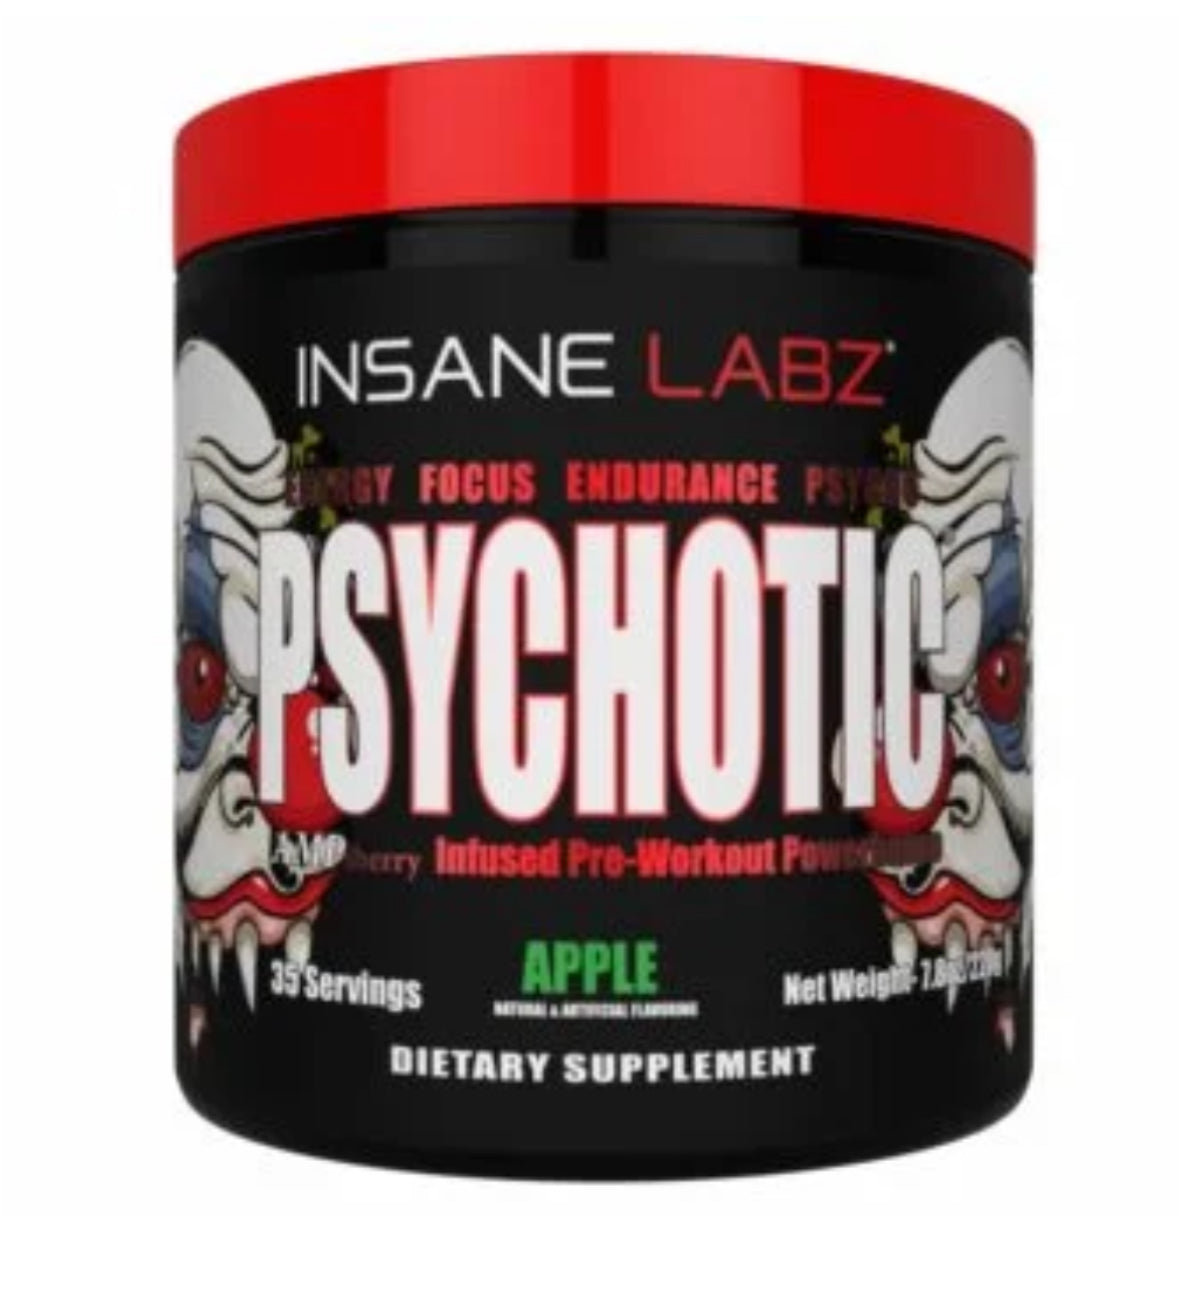 Insane Labz Psychotic Infused Pre-Workout - 204.12 gm (0.45 Lb), Fruit Punch